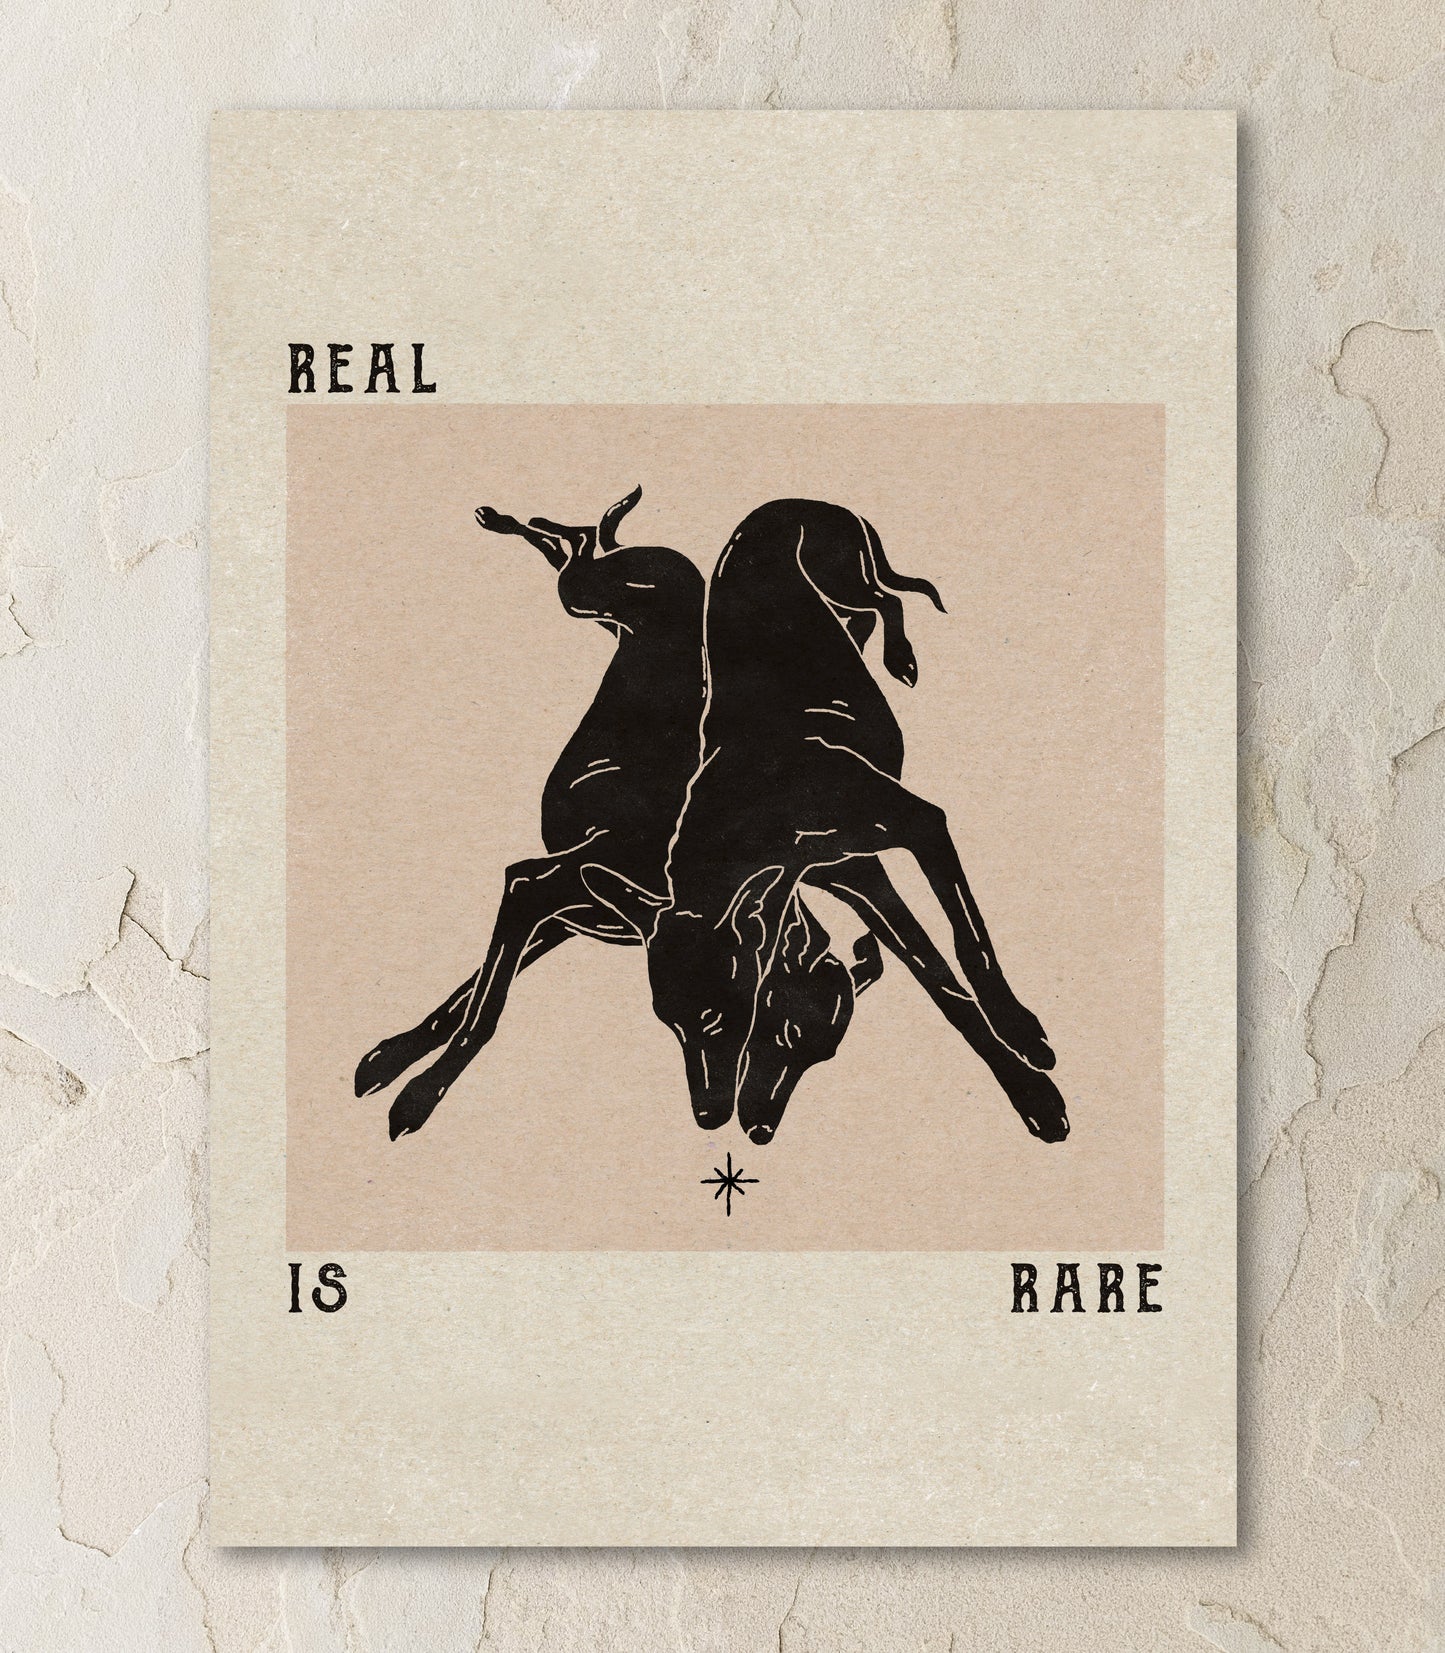 'Real is rare' print